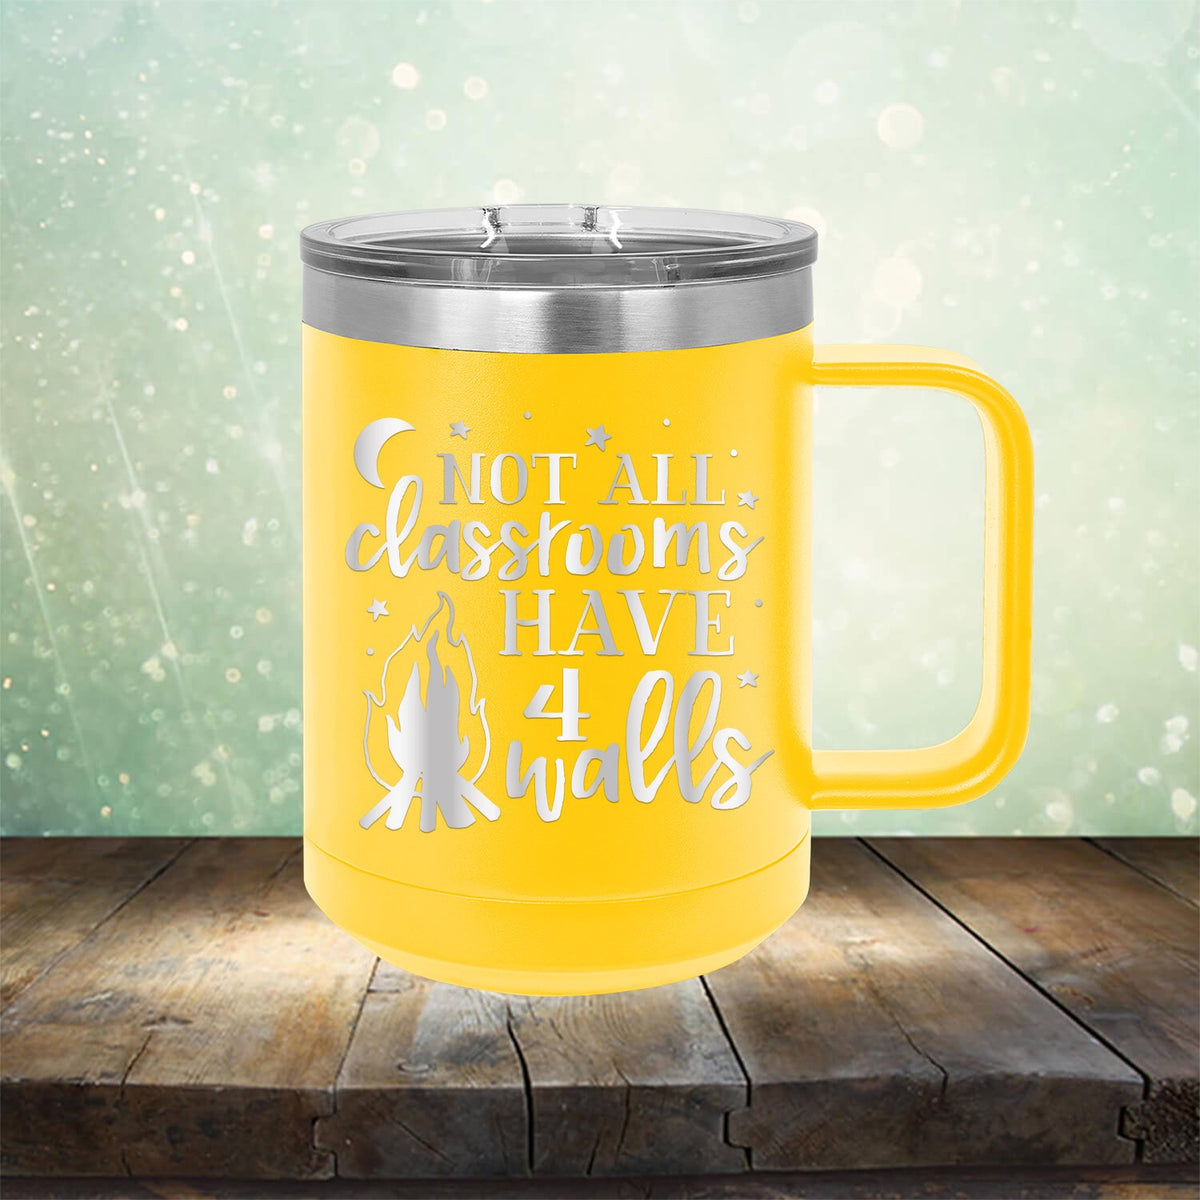 Not All Classrooms Have 4 Walls - Laser Etched Tumbler Mug